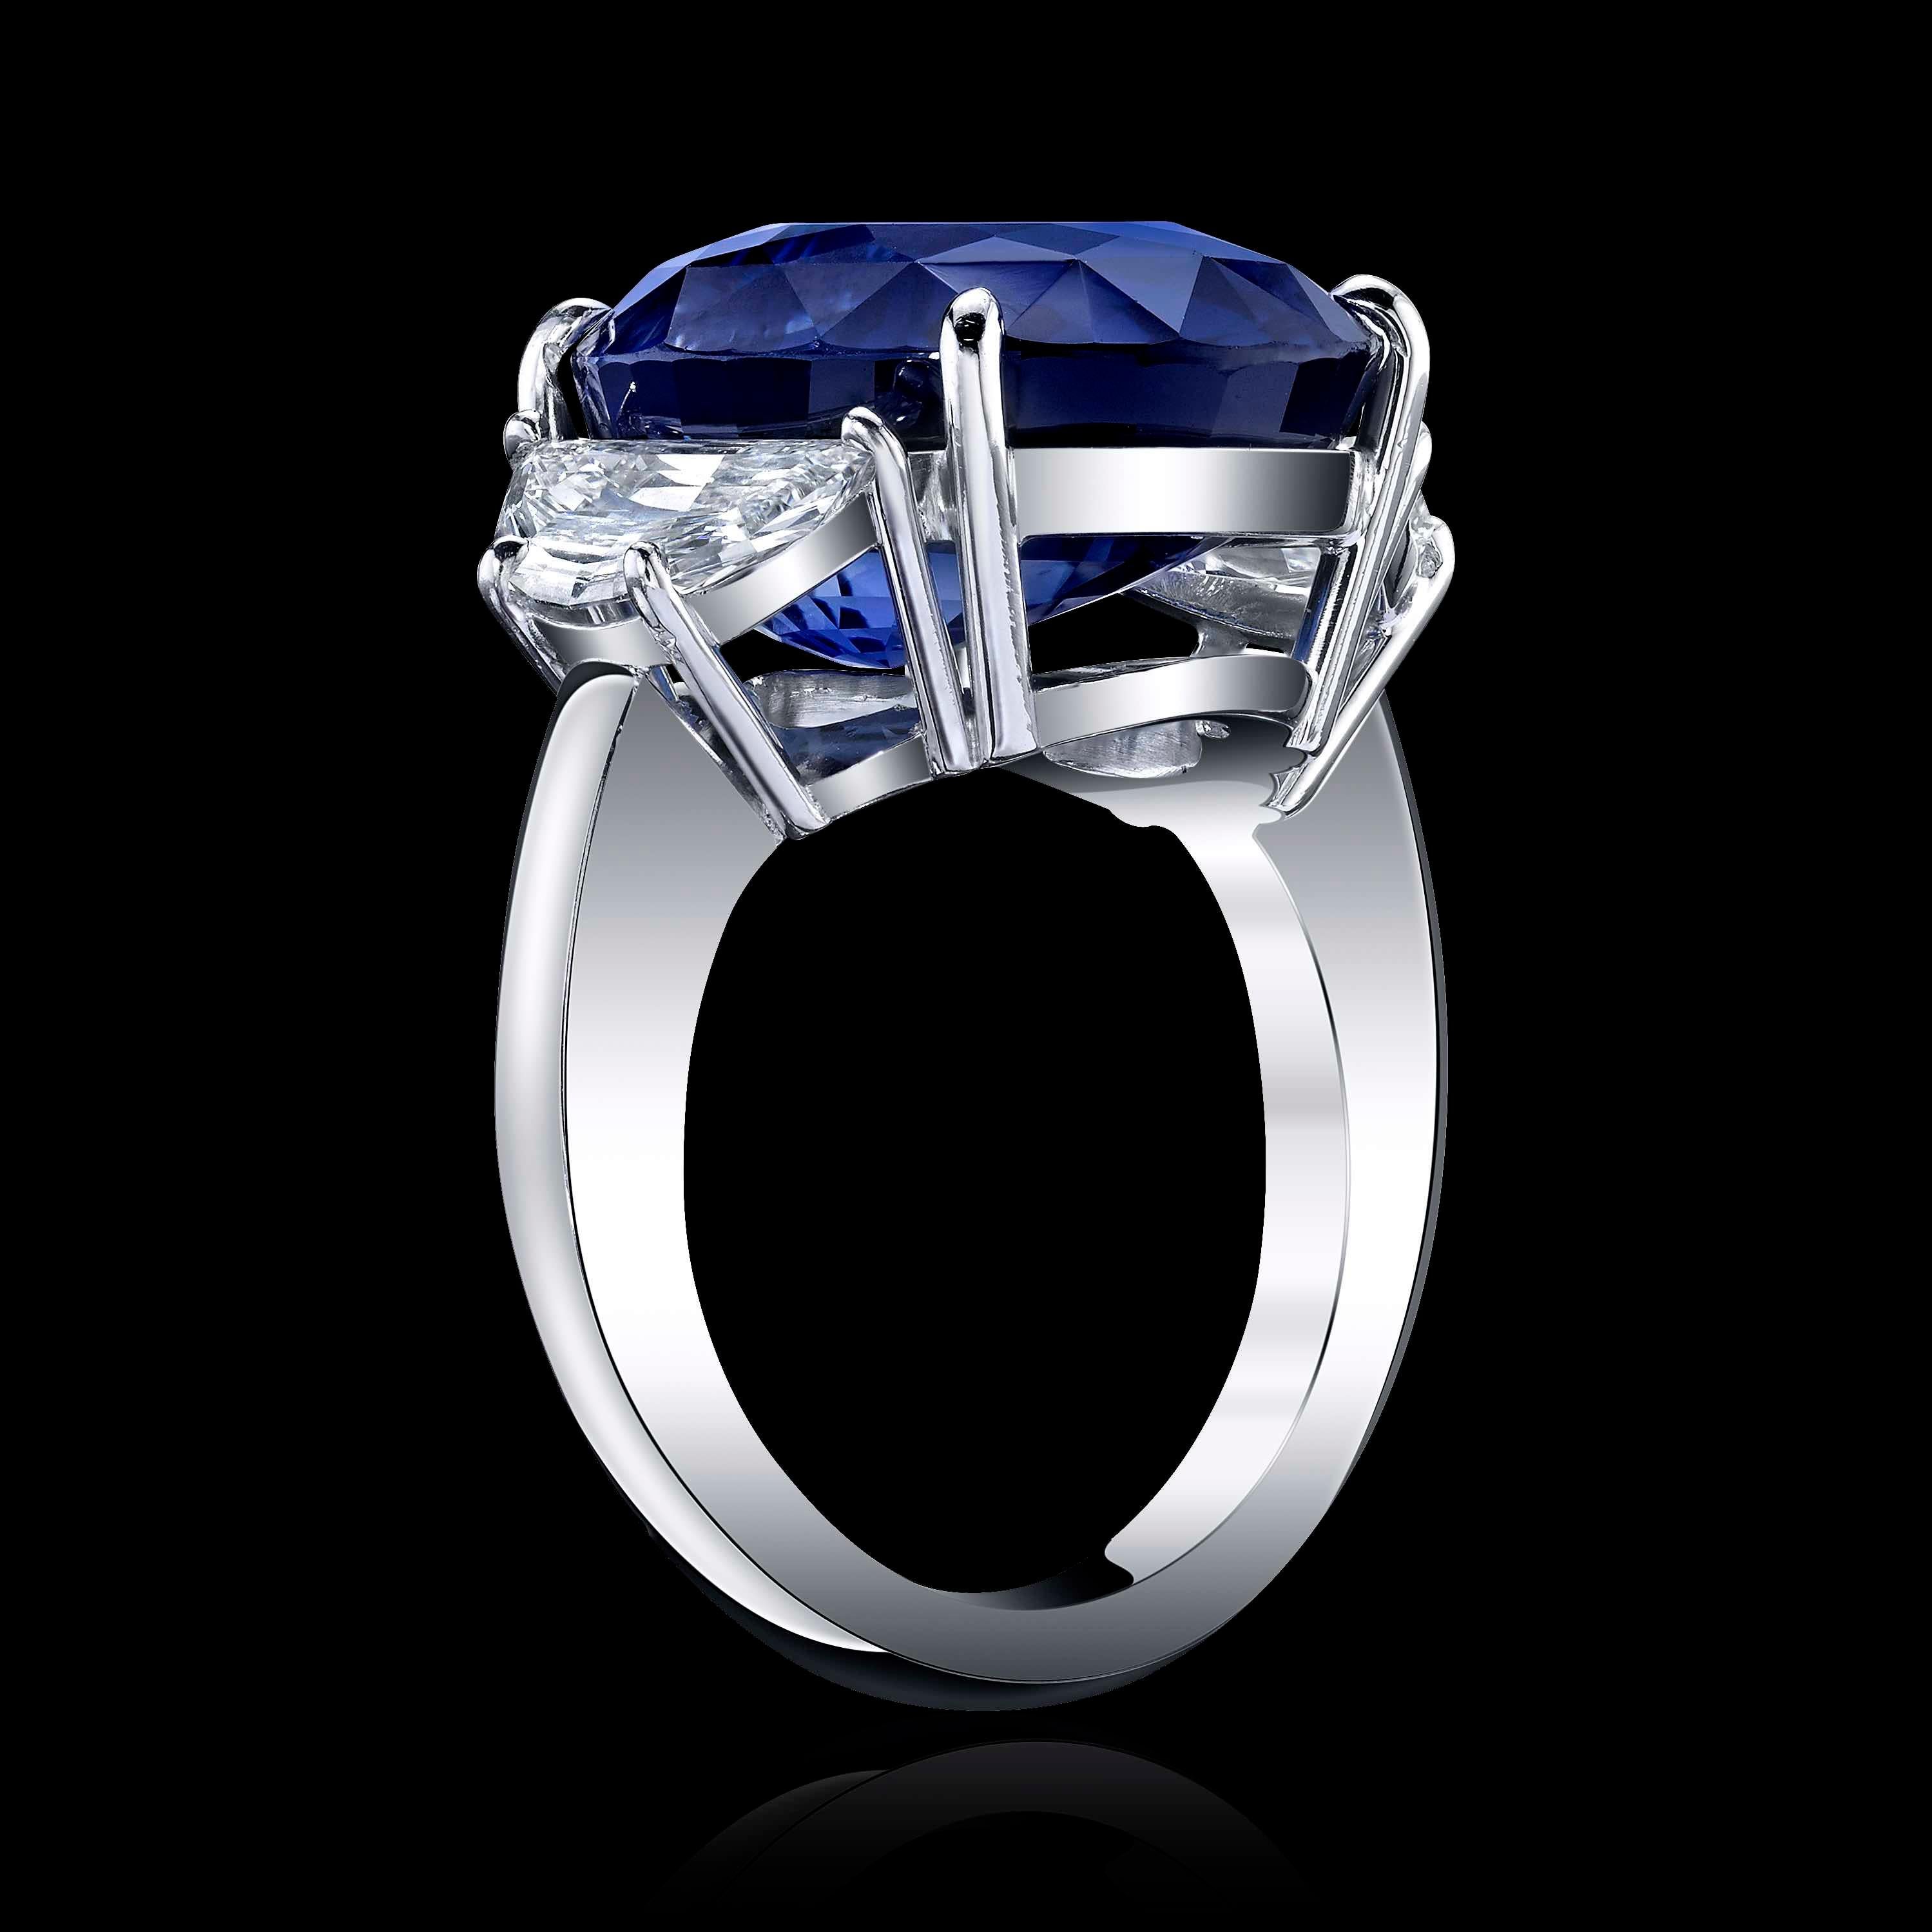 This 22.01ct Oval Blue Sapphire is an incredible stone, graded by both GIA GIA 61559544234 and AGL CS 35545 

This beauty is set in a platinum ring with two sides Half Moon Diamonds=with 0.50CTTW color - F/G and VS clarity 